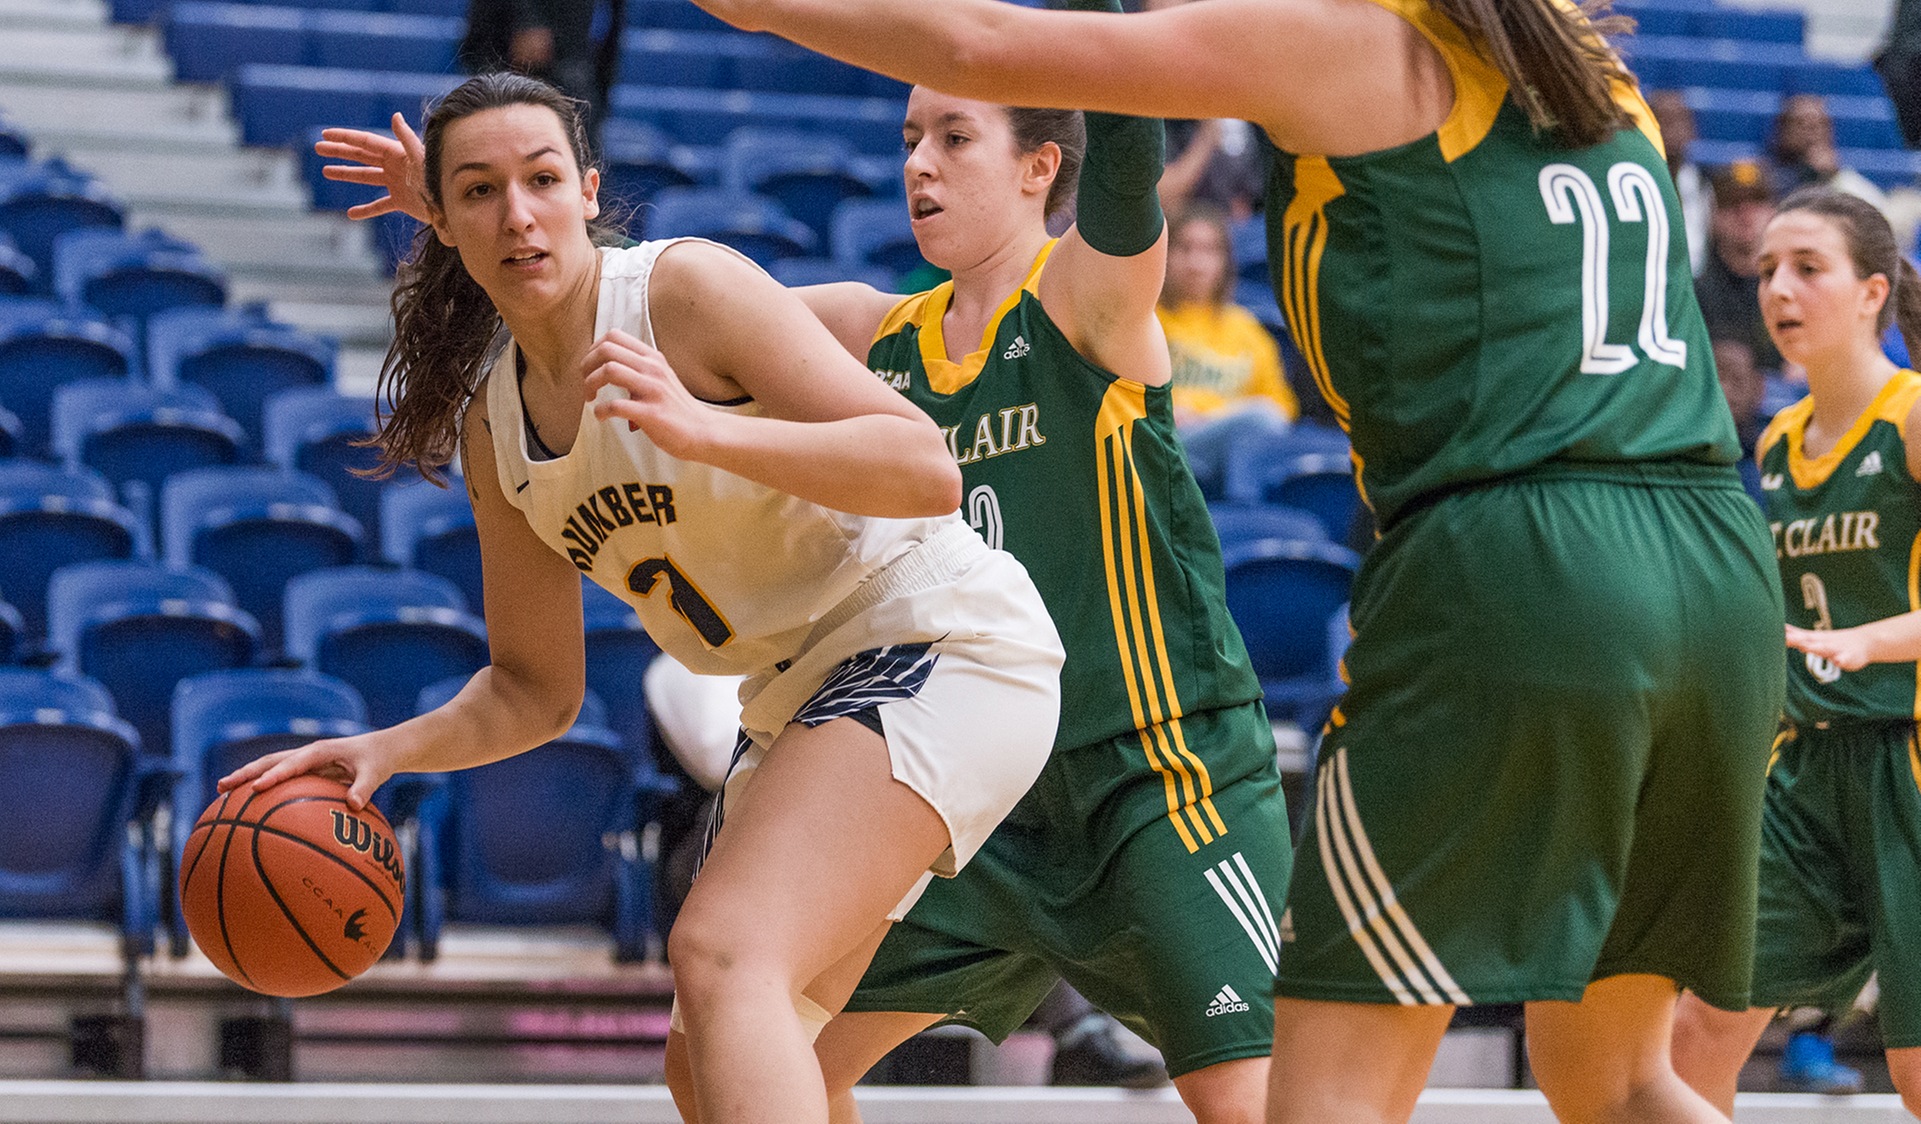 MEADOWS' CAREER-HIGH LIFTS No. 12 HUMBER PAST ST. CLAIR, 84-66